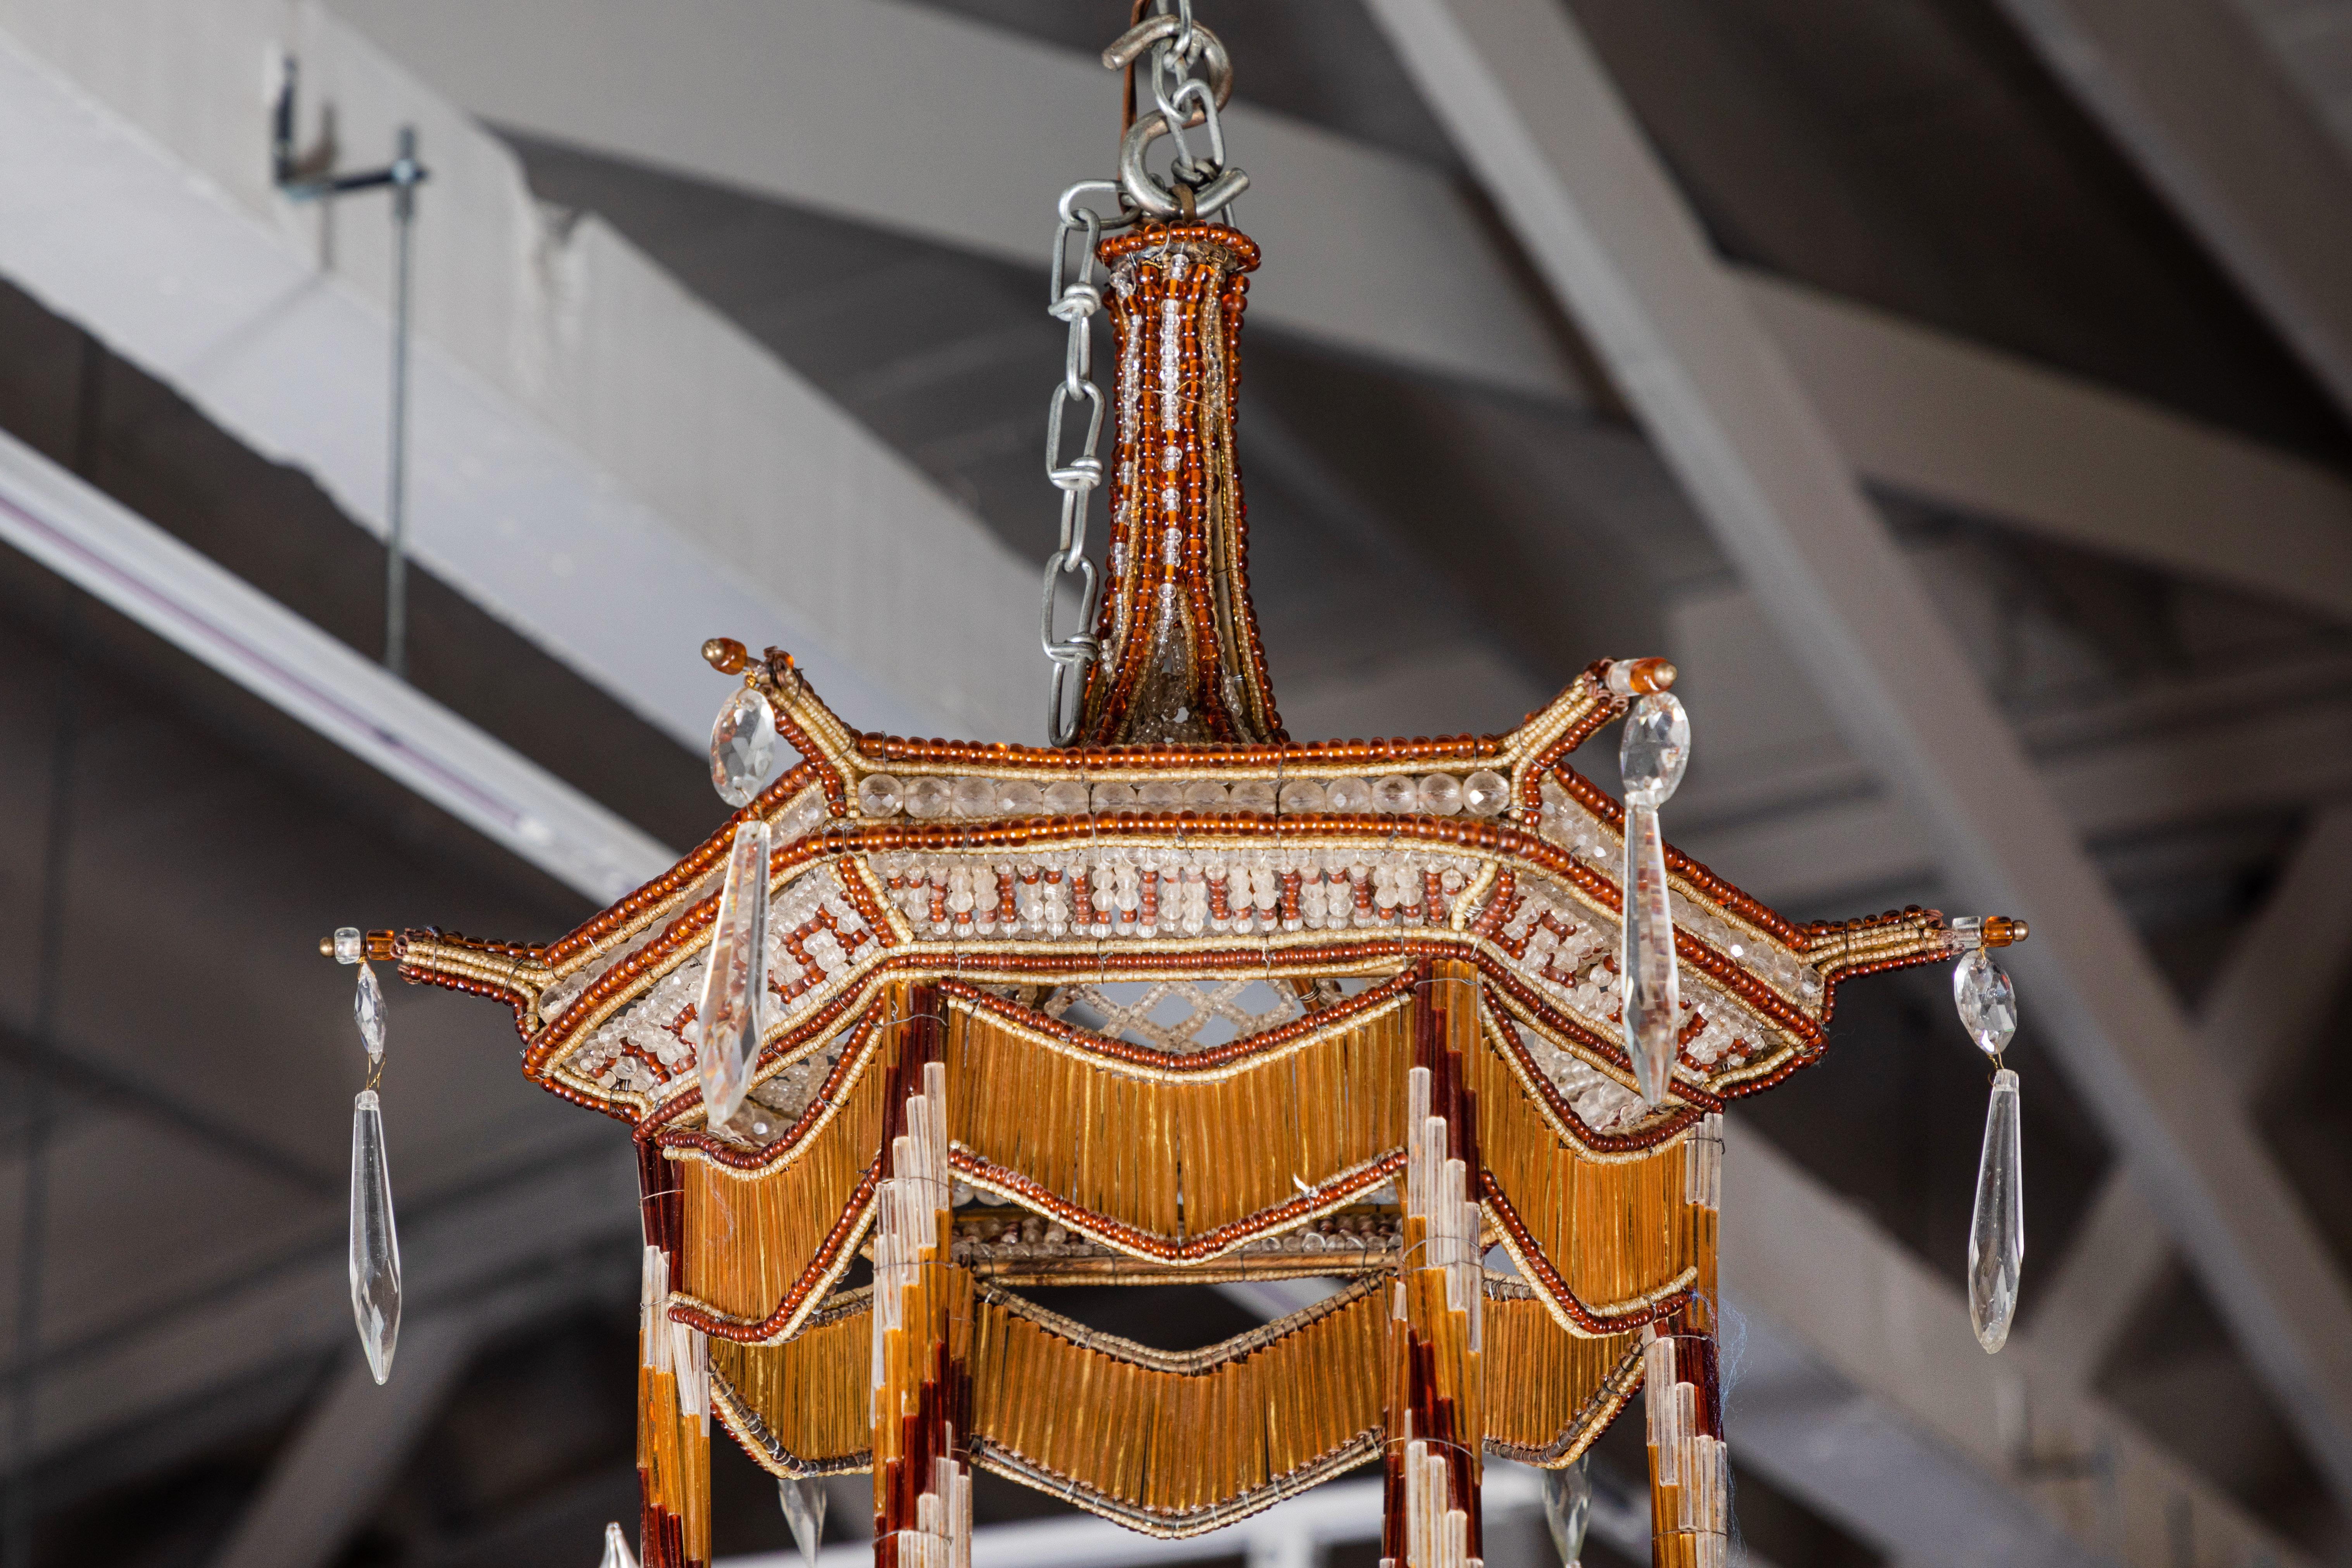 Striking, hand-beaded, six-arm, Sicilian pagoda-style chandelier trimmed in gold and crimson. The pierced basket is matched by an upper body dish of the same, with the latter embellished by faux draper swags.